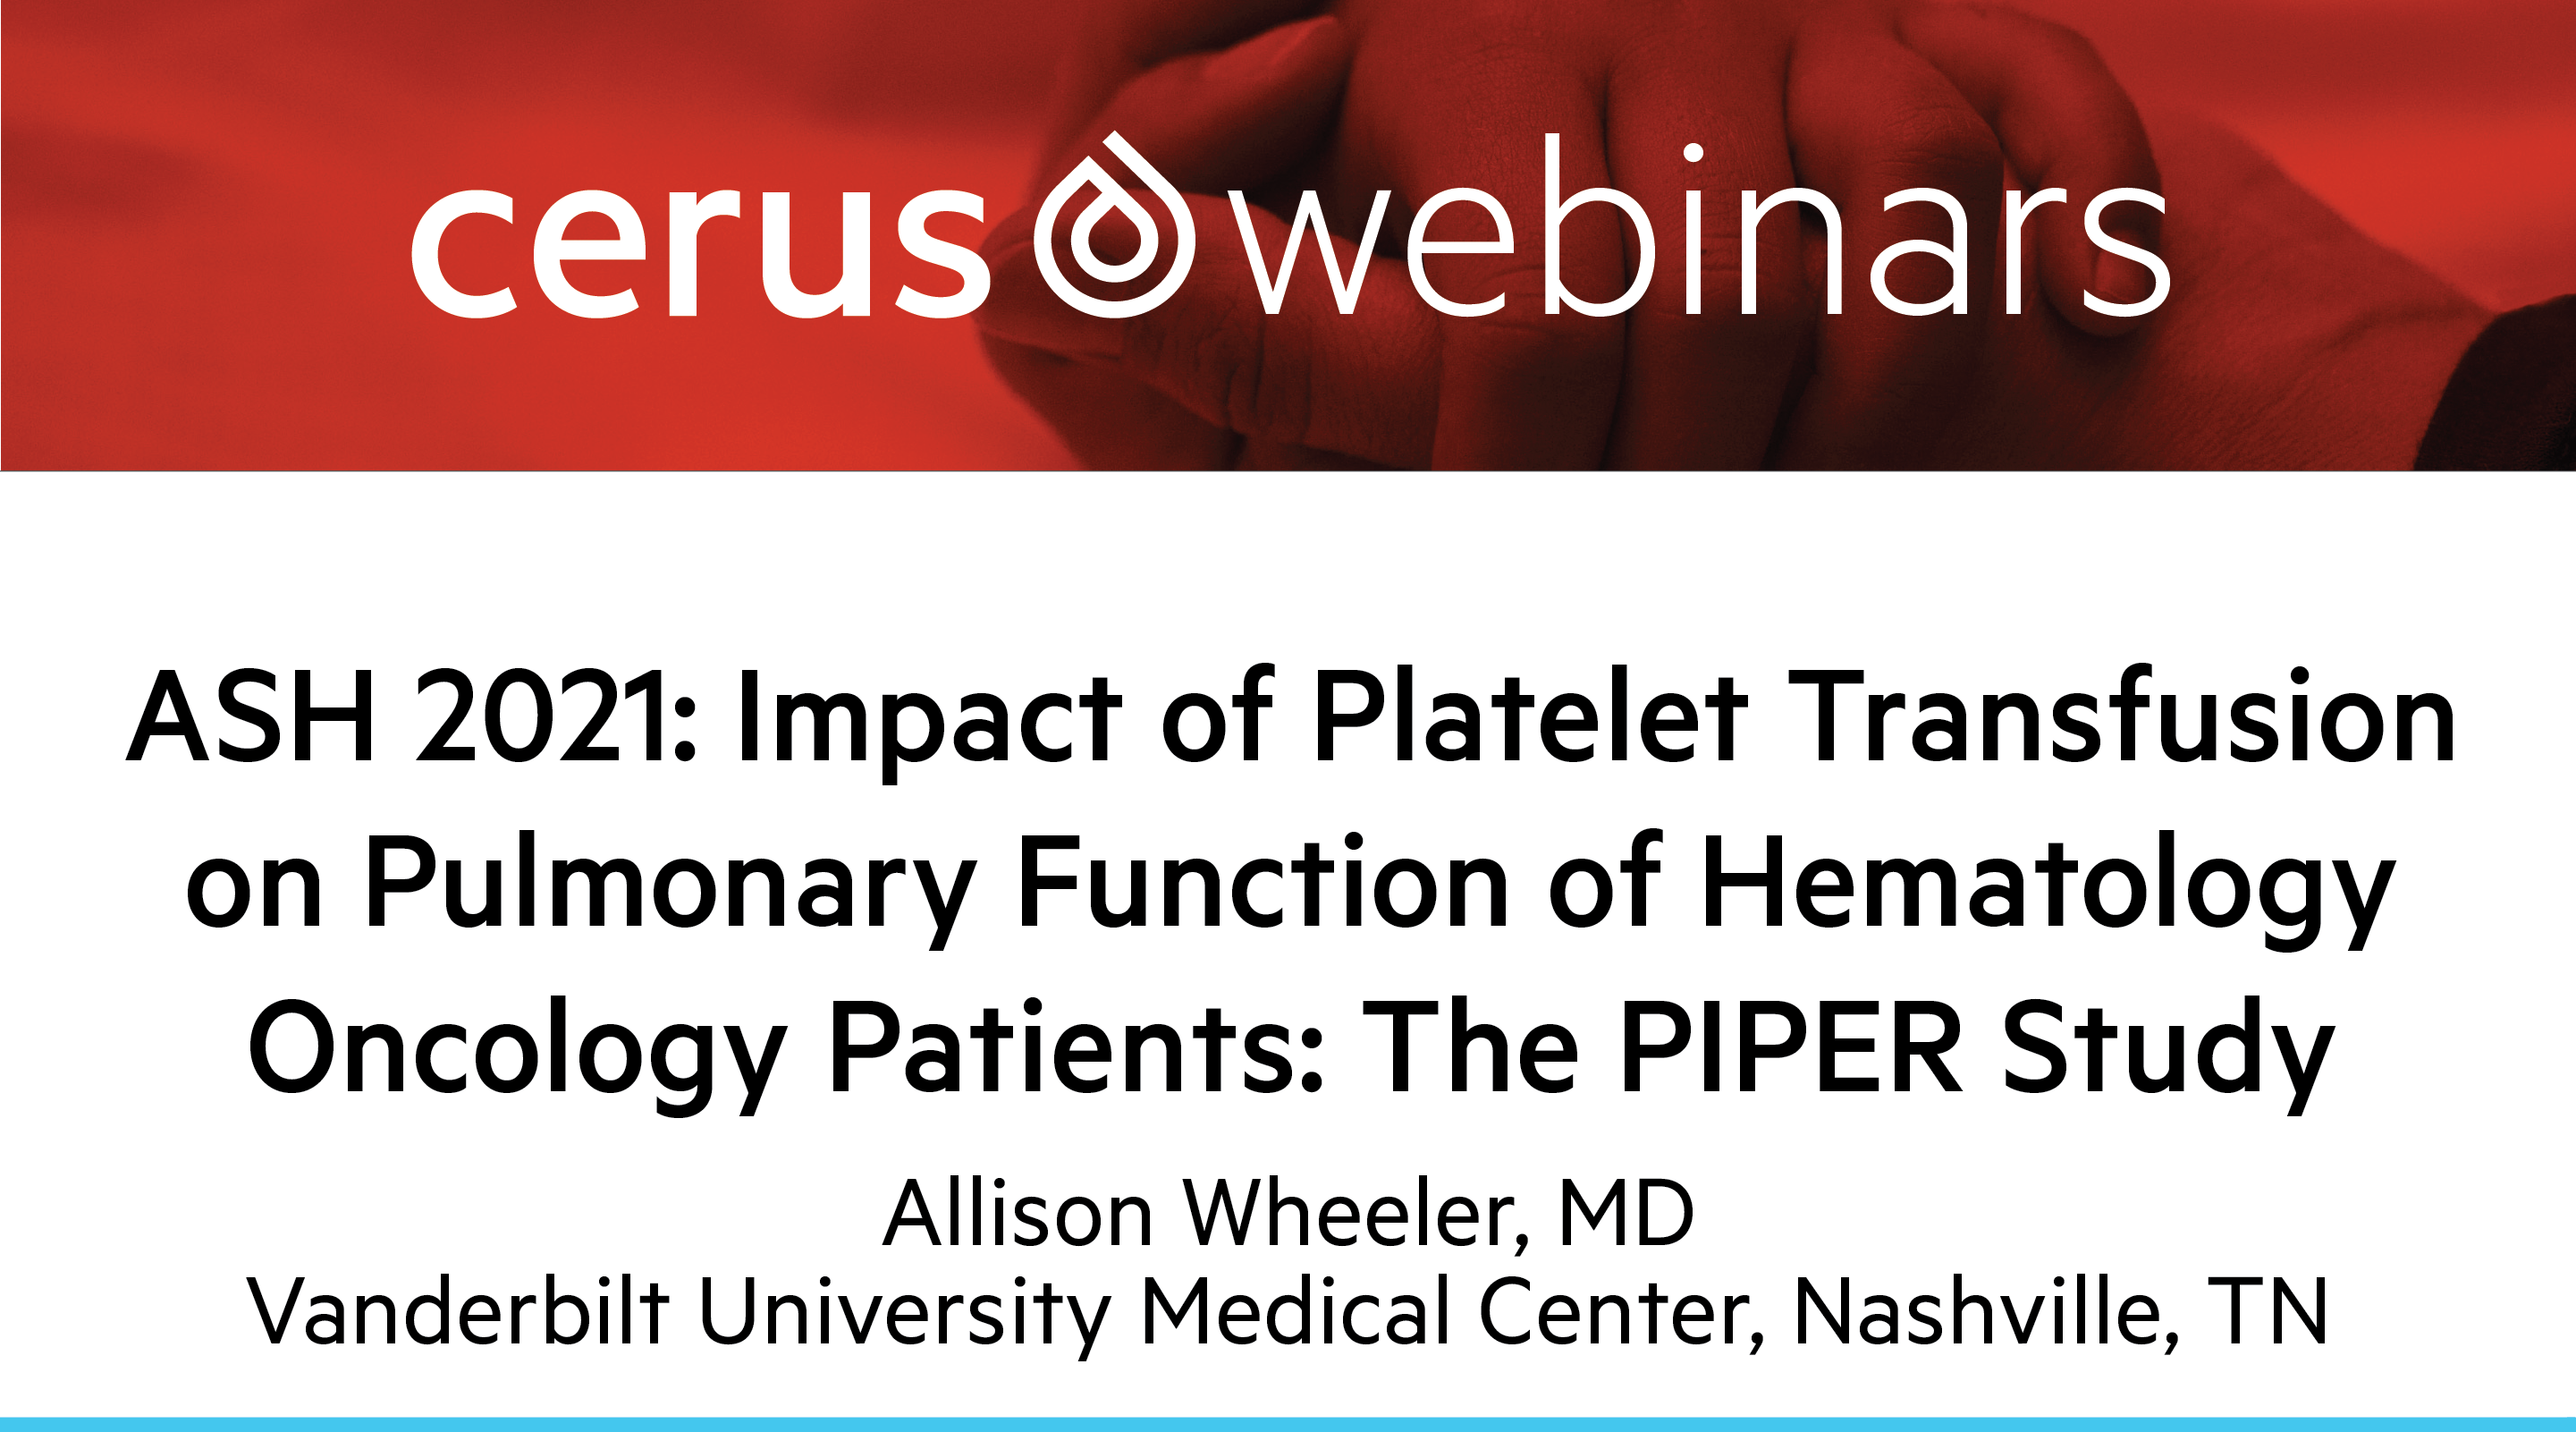 Impact of Platelet Transfusion on Pulmonary Function of Hematology Oncology Patients: The PIPER Study